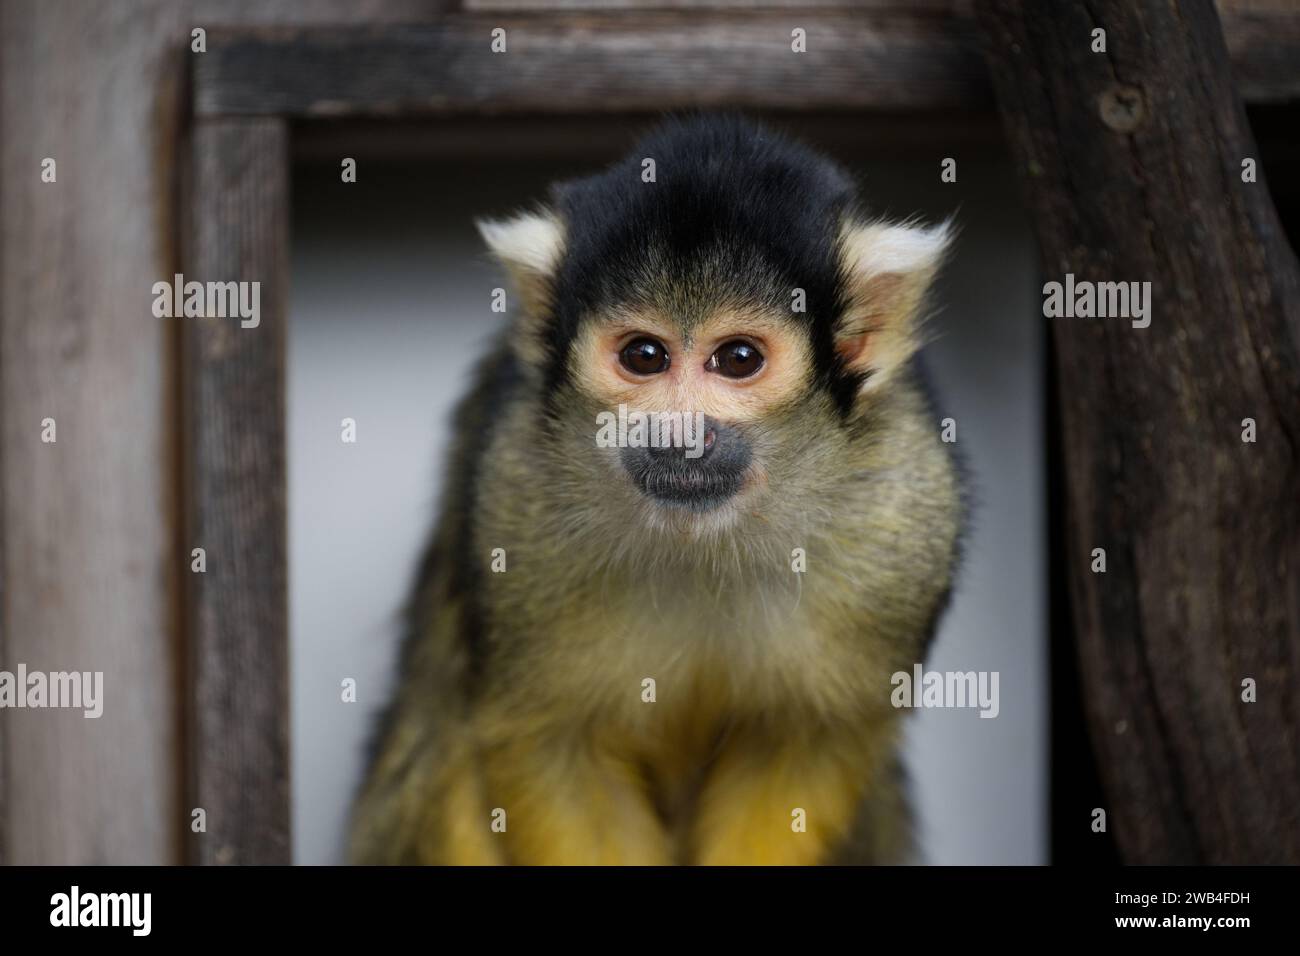 Black-capped squirrel monkey at London Zoo Stock Photo